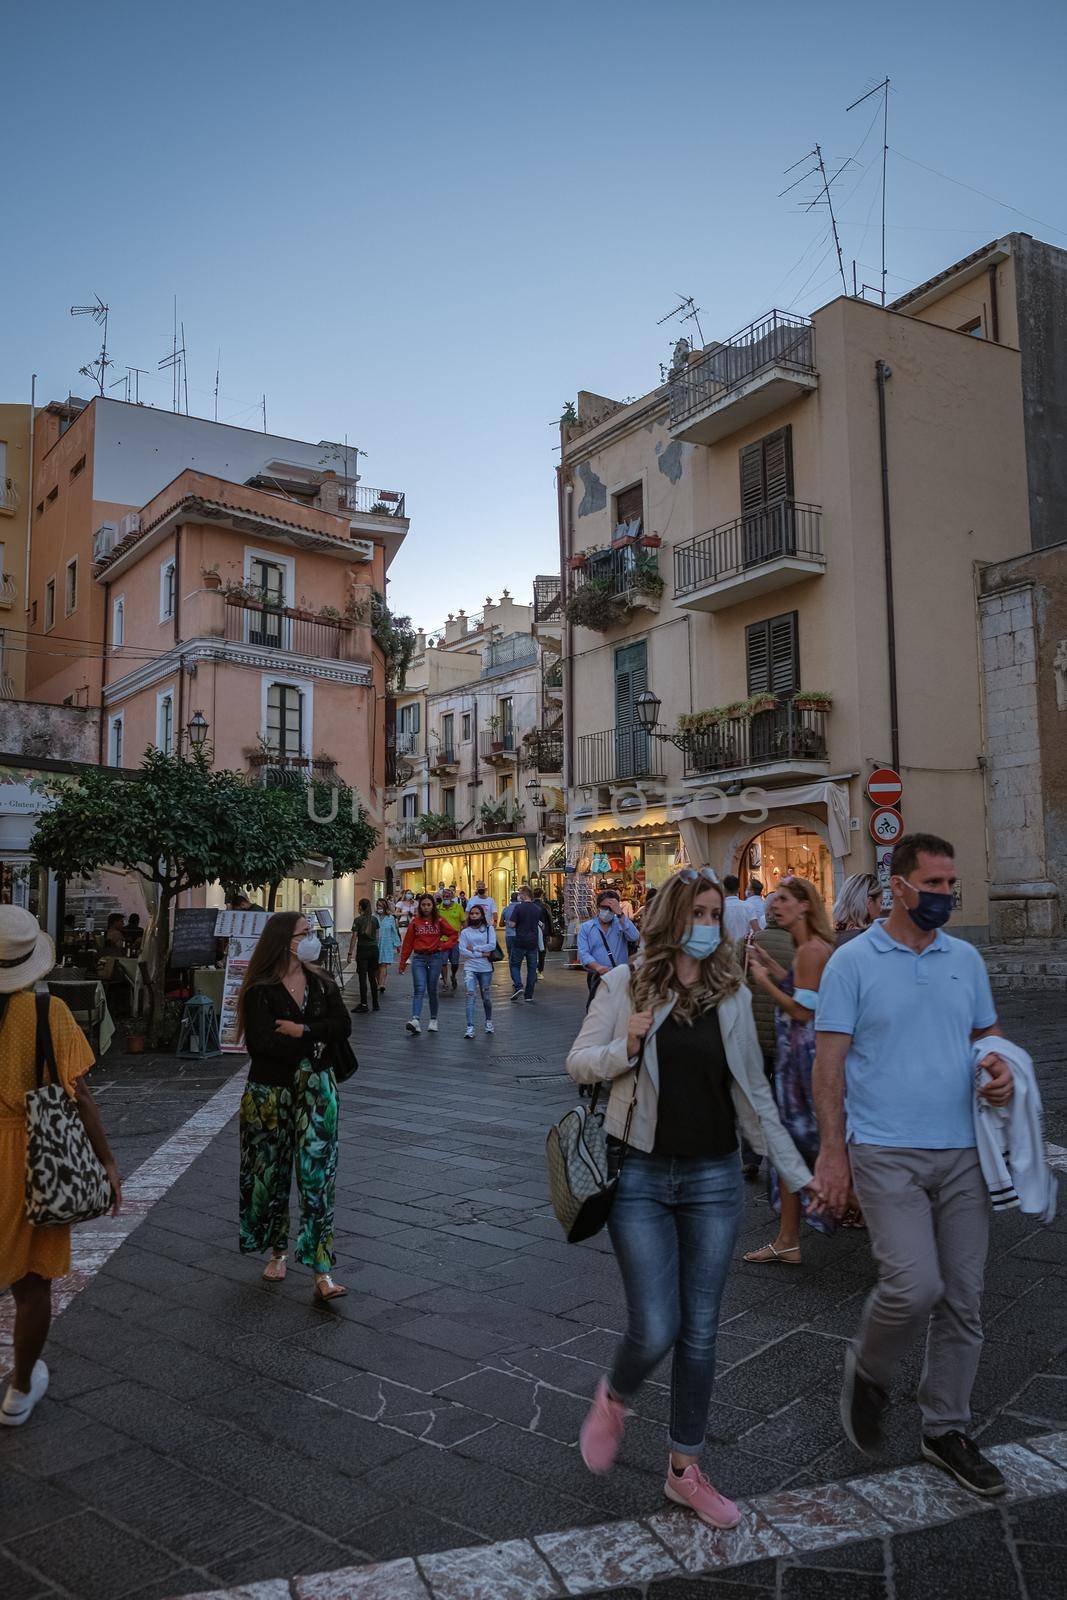 Taormina Sicily , people on the streets using fase mask during the pandemic Corona Covid 19 virus outbreak by fokkebok